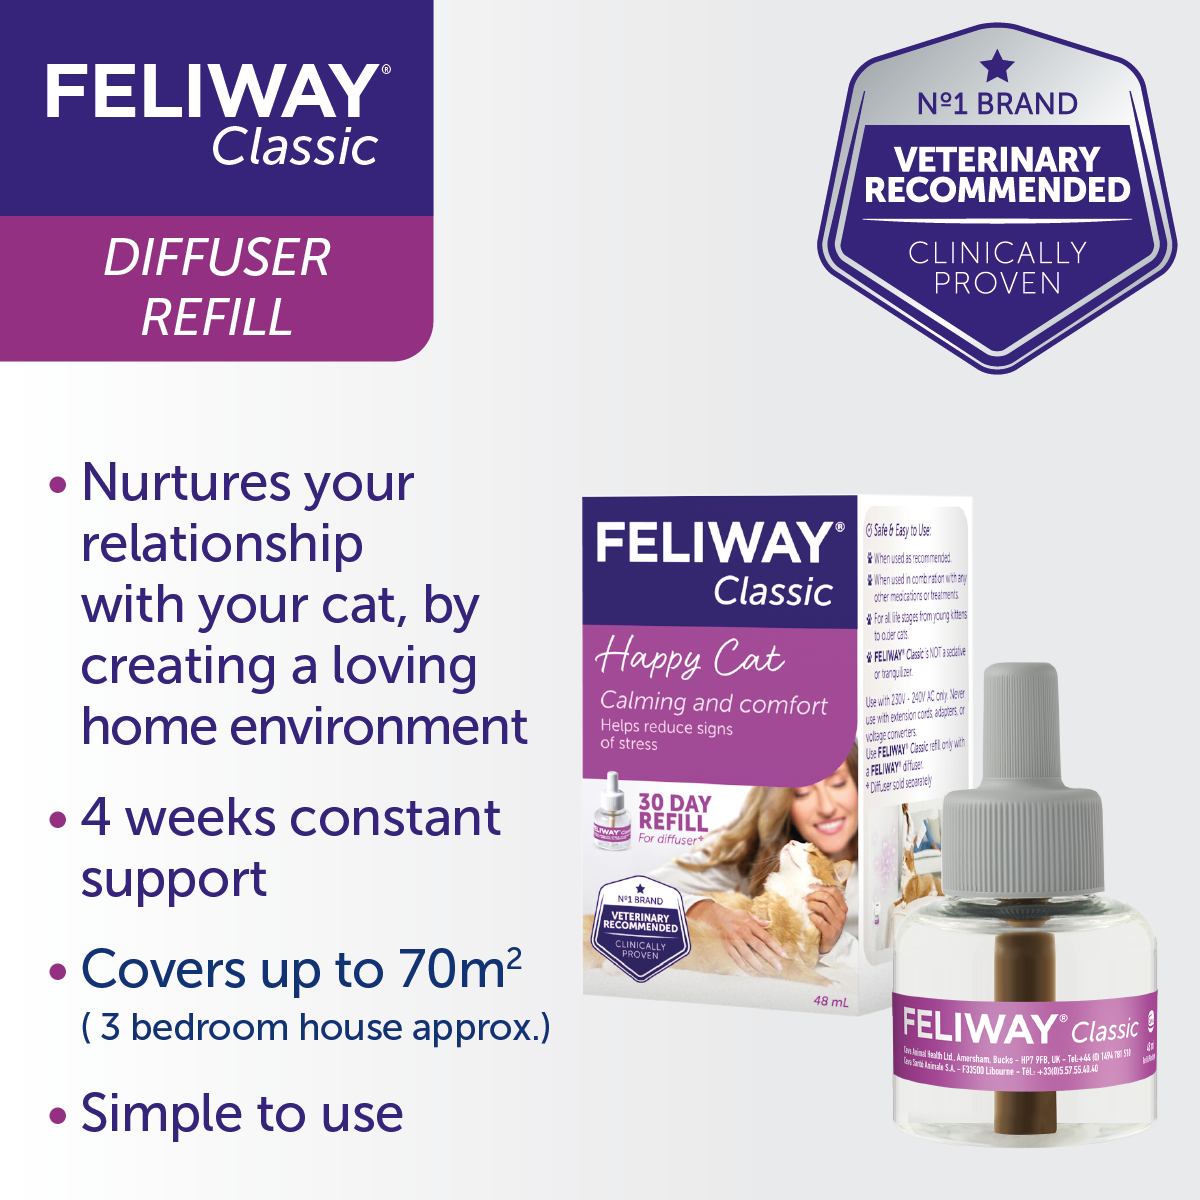 Feliway Classic 30-Day Refill for Diffuser (3 Pack)